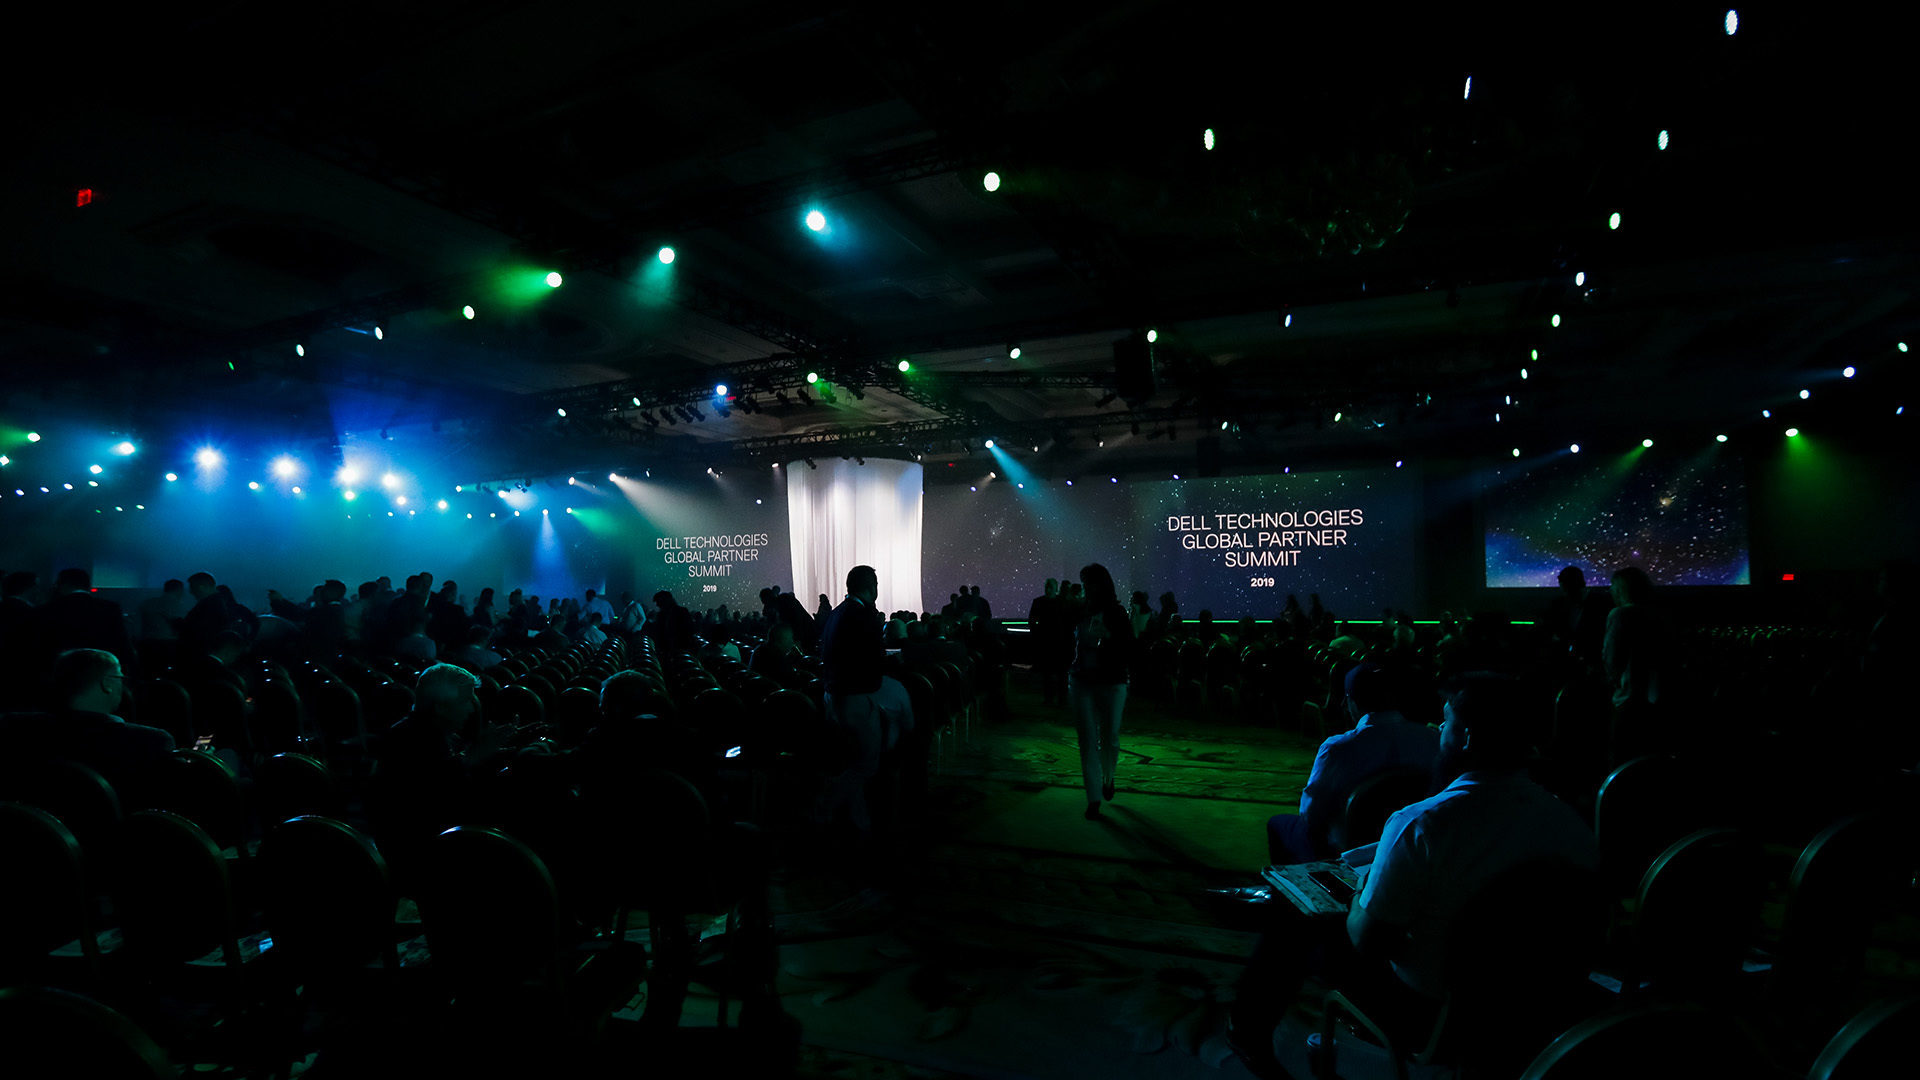 View of the main stage from the back of the room with a full audience and green and blue lights throughout the room.